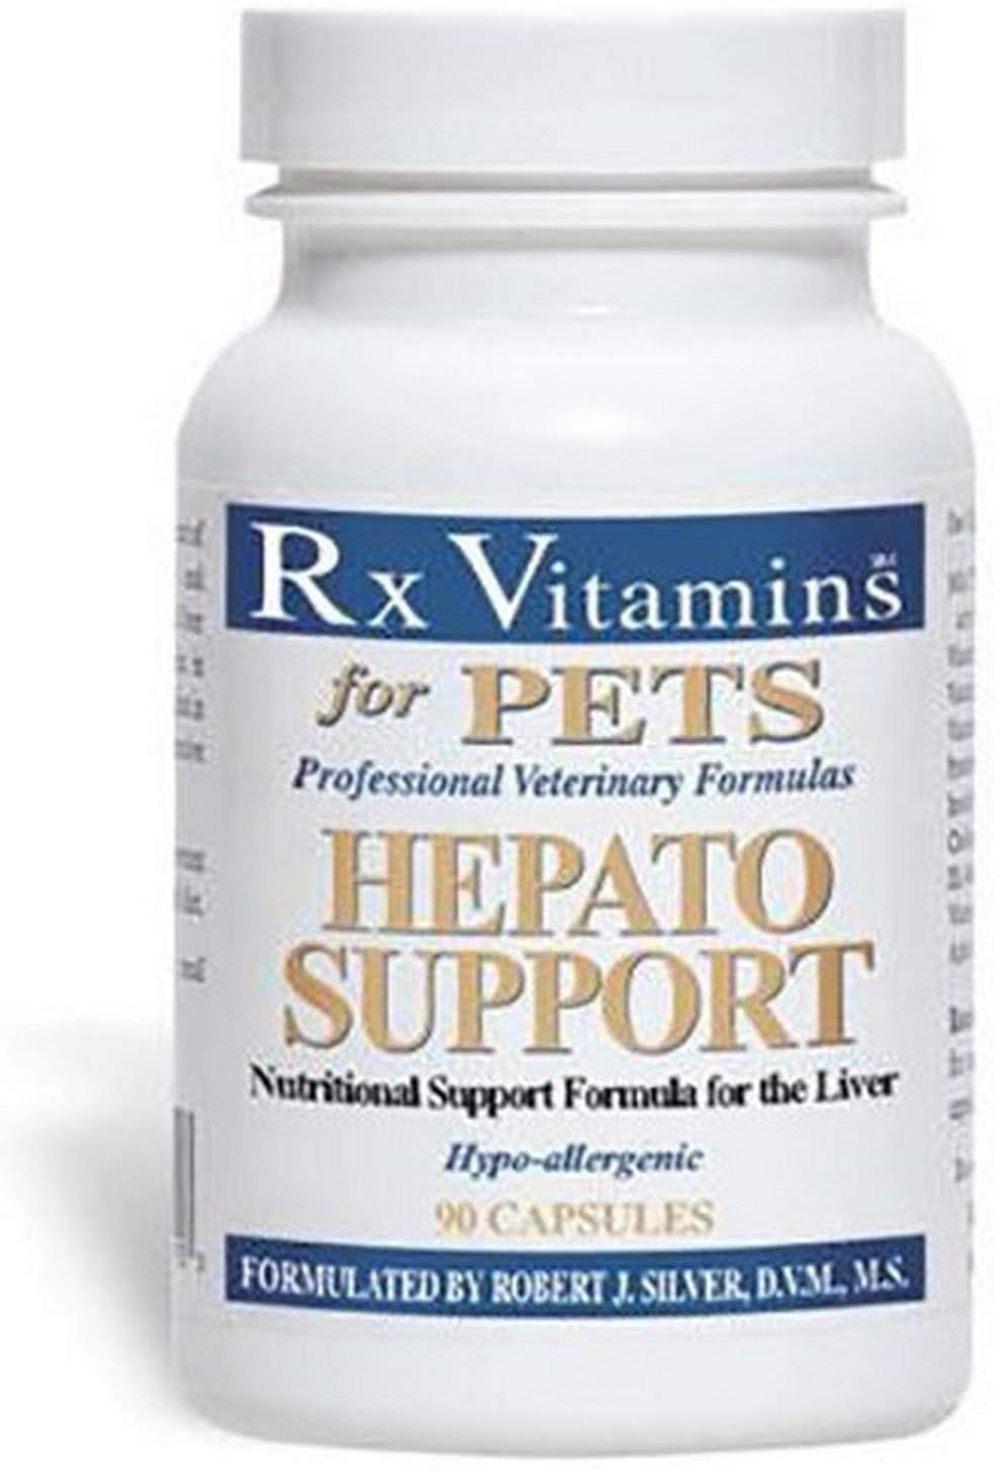 Rx Vitamins for Pets Hepato Support For Dogs &  Cats ...